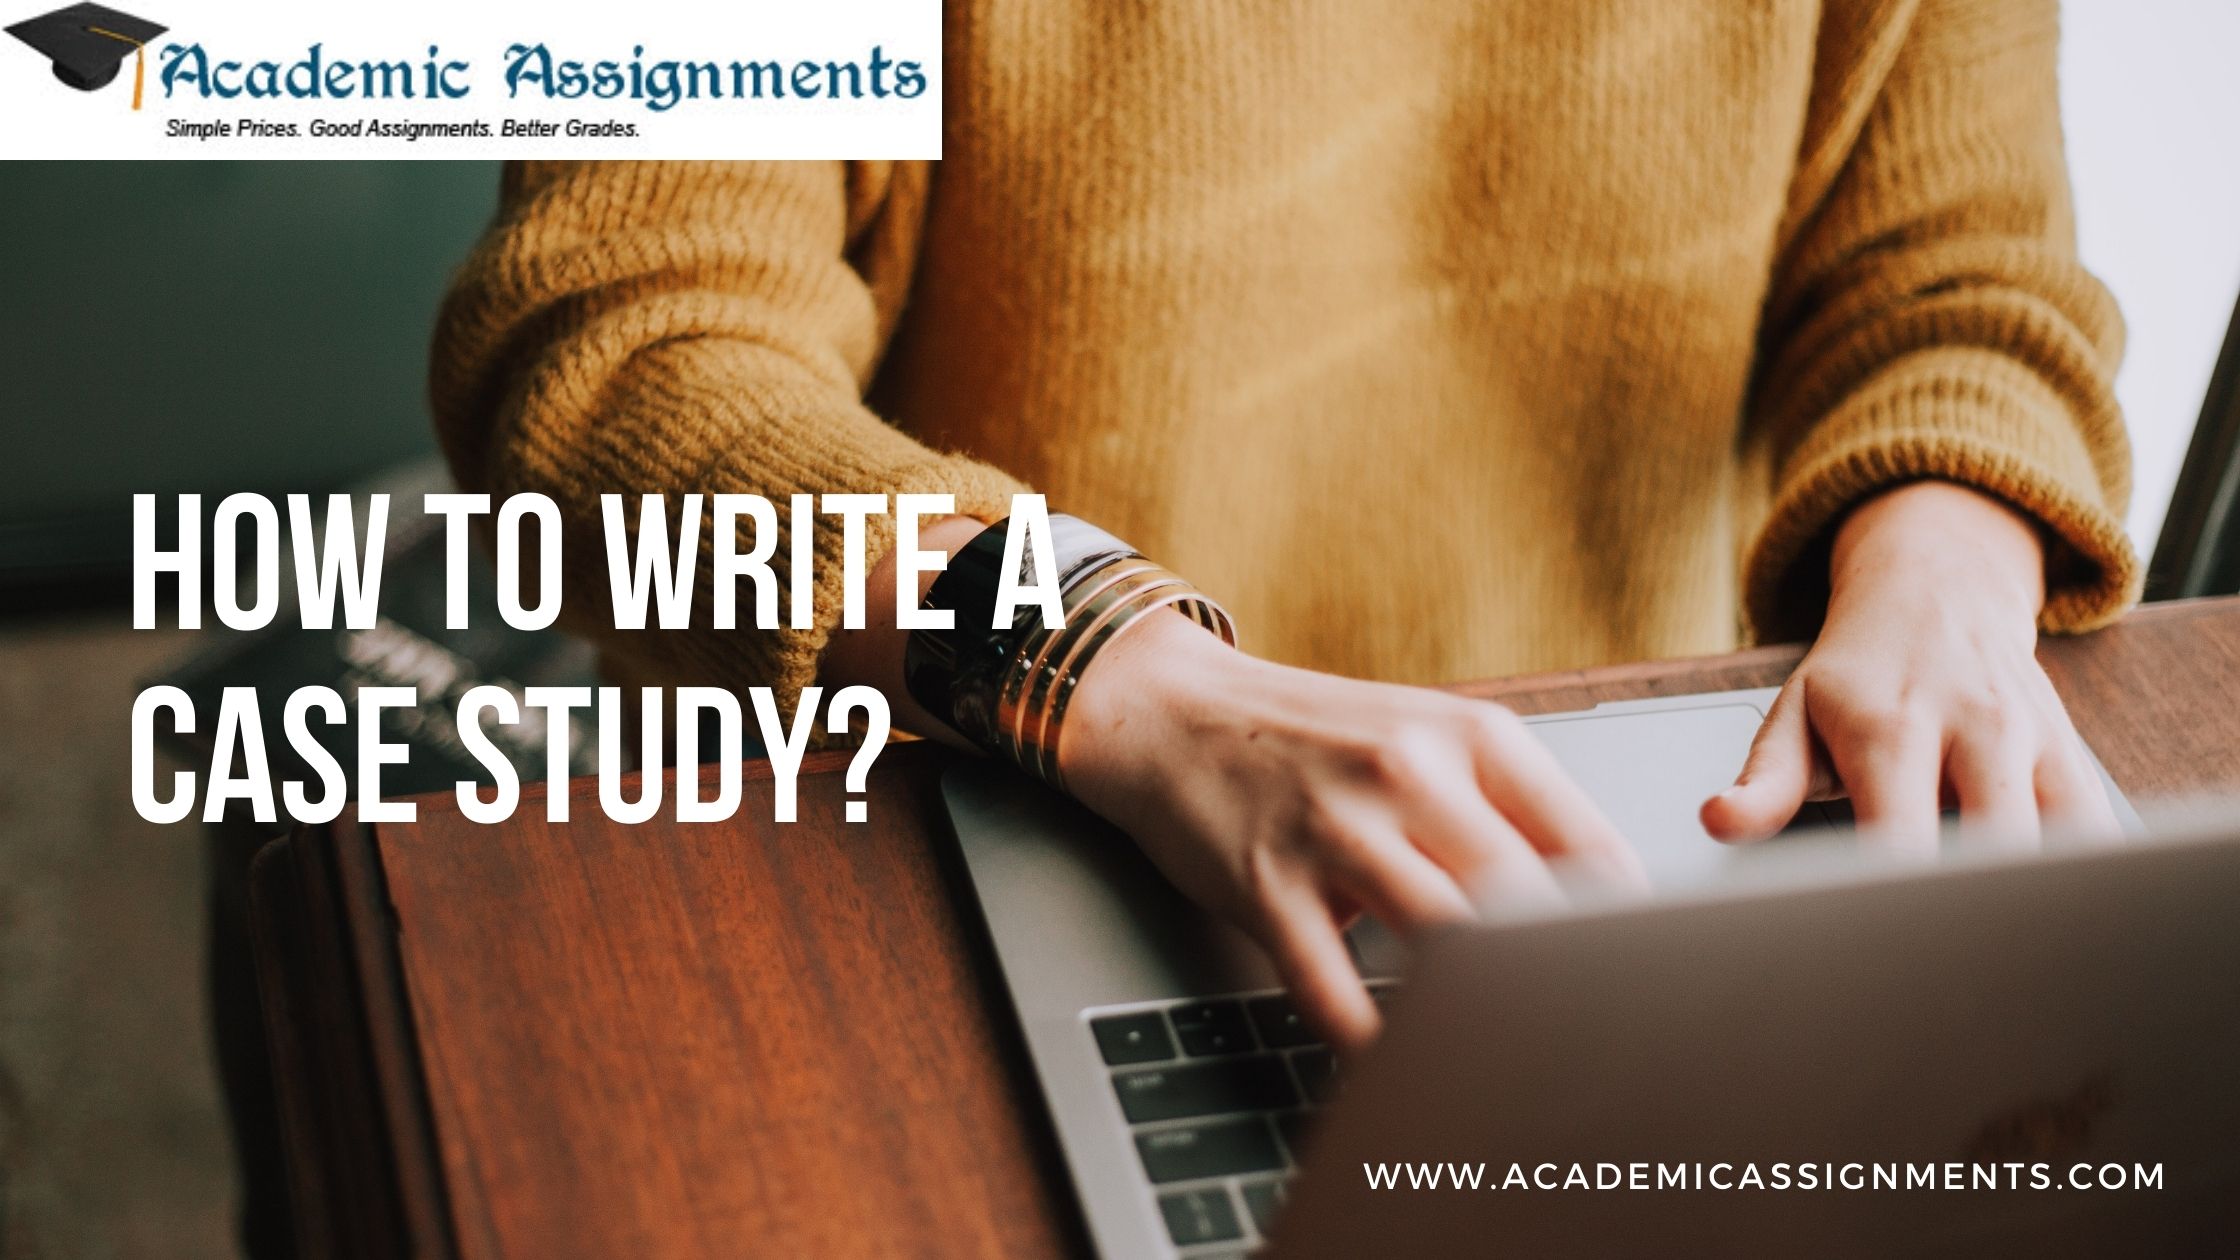 HOW TO WRITE A CASE STUDY